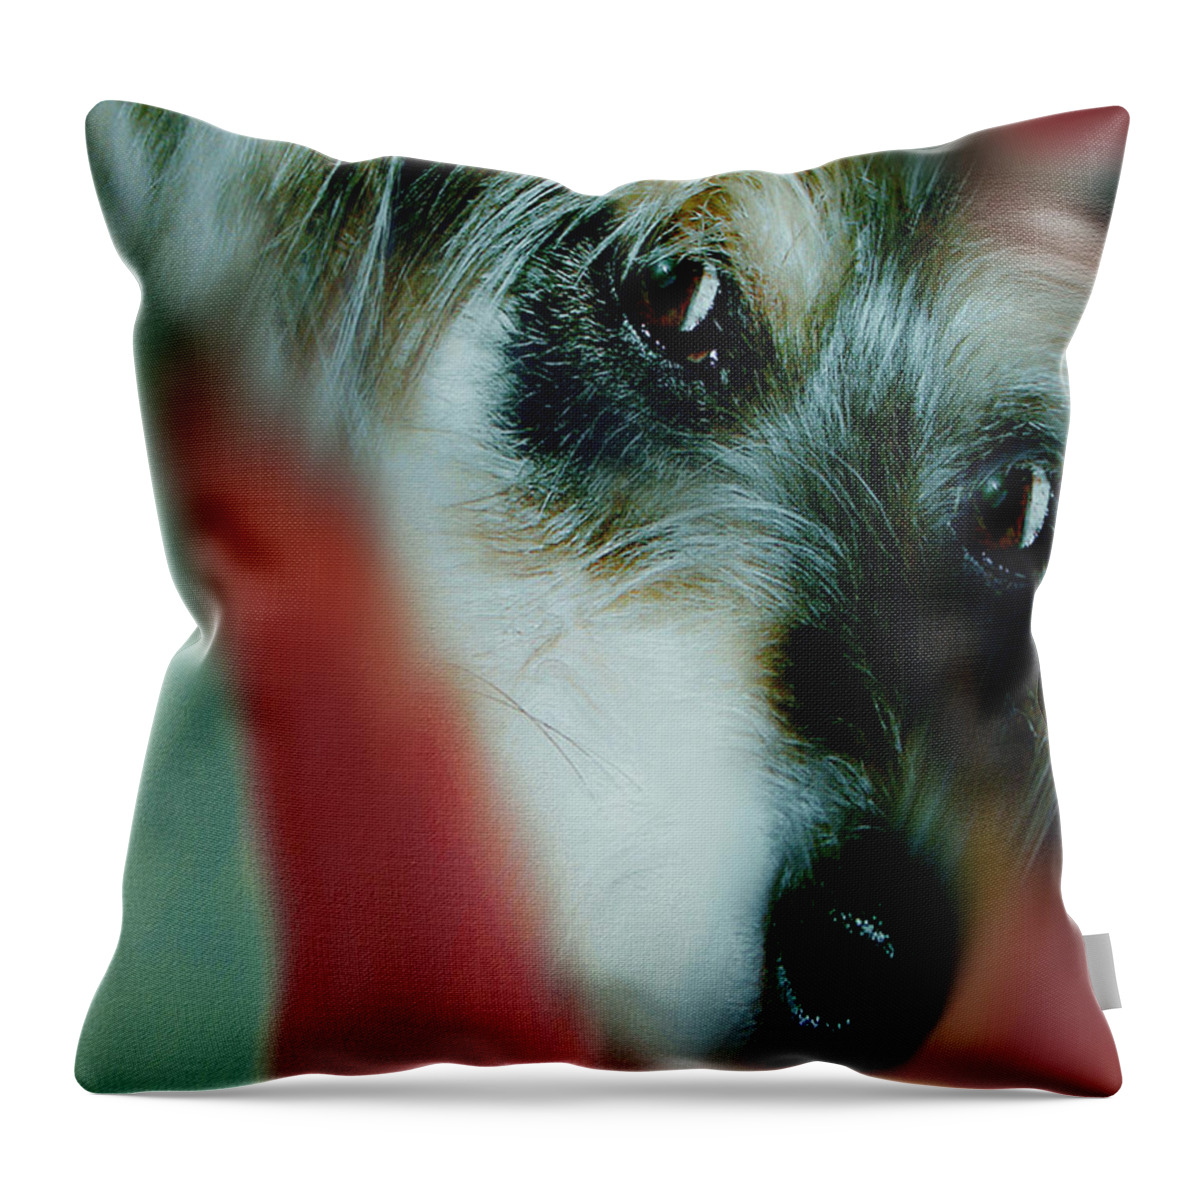 Art Throw Pillow featuring the digital art And this is Sparky 15 by Miss Pet Sitter